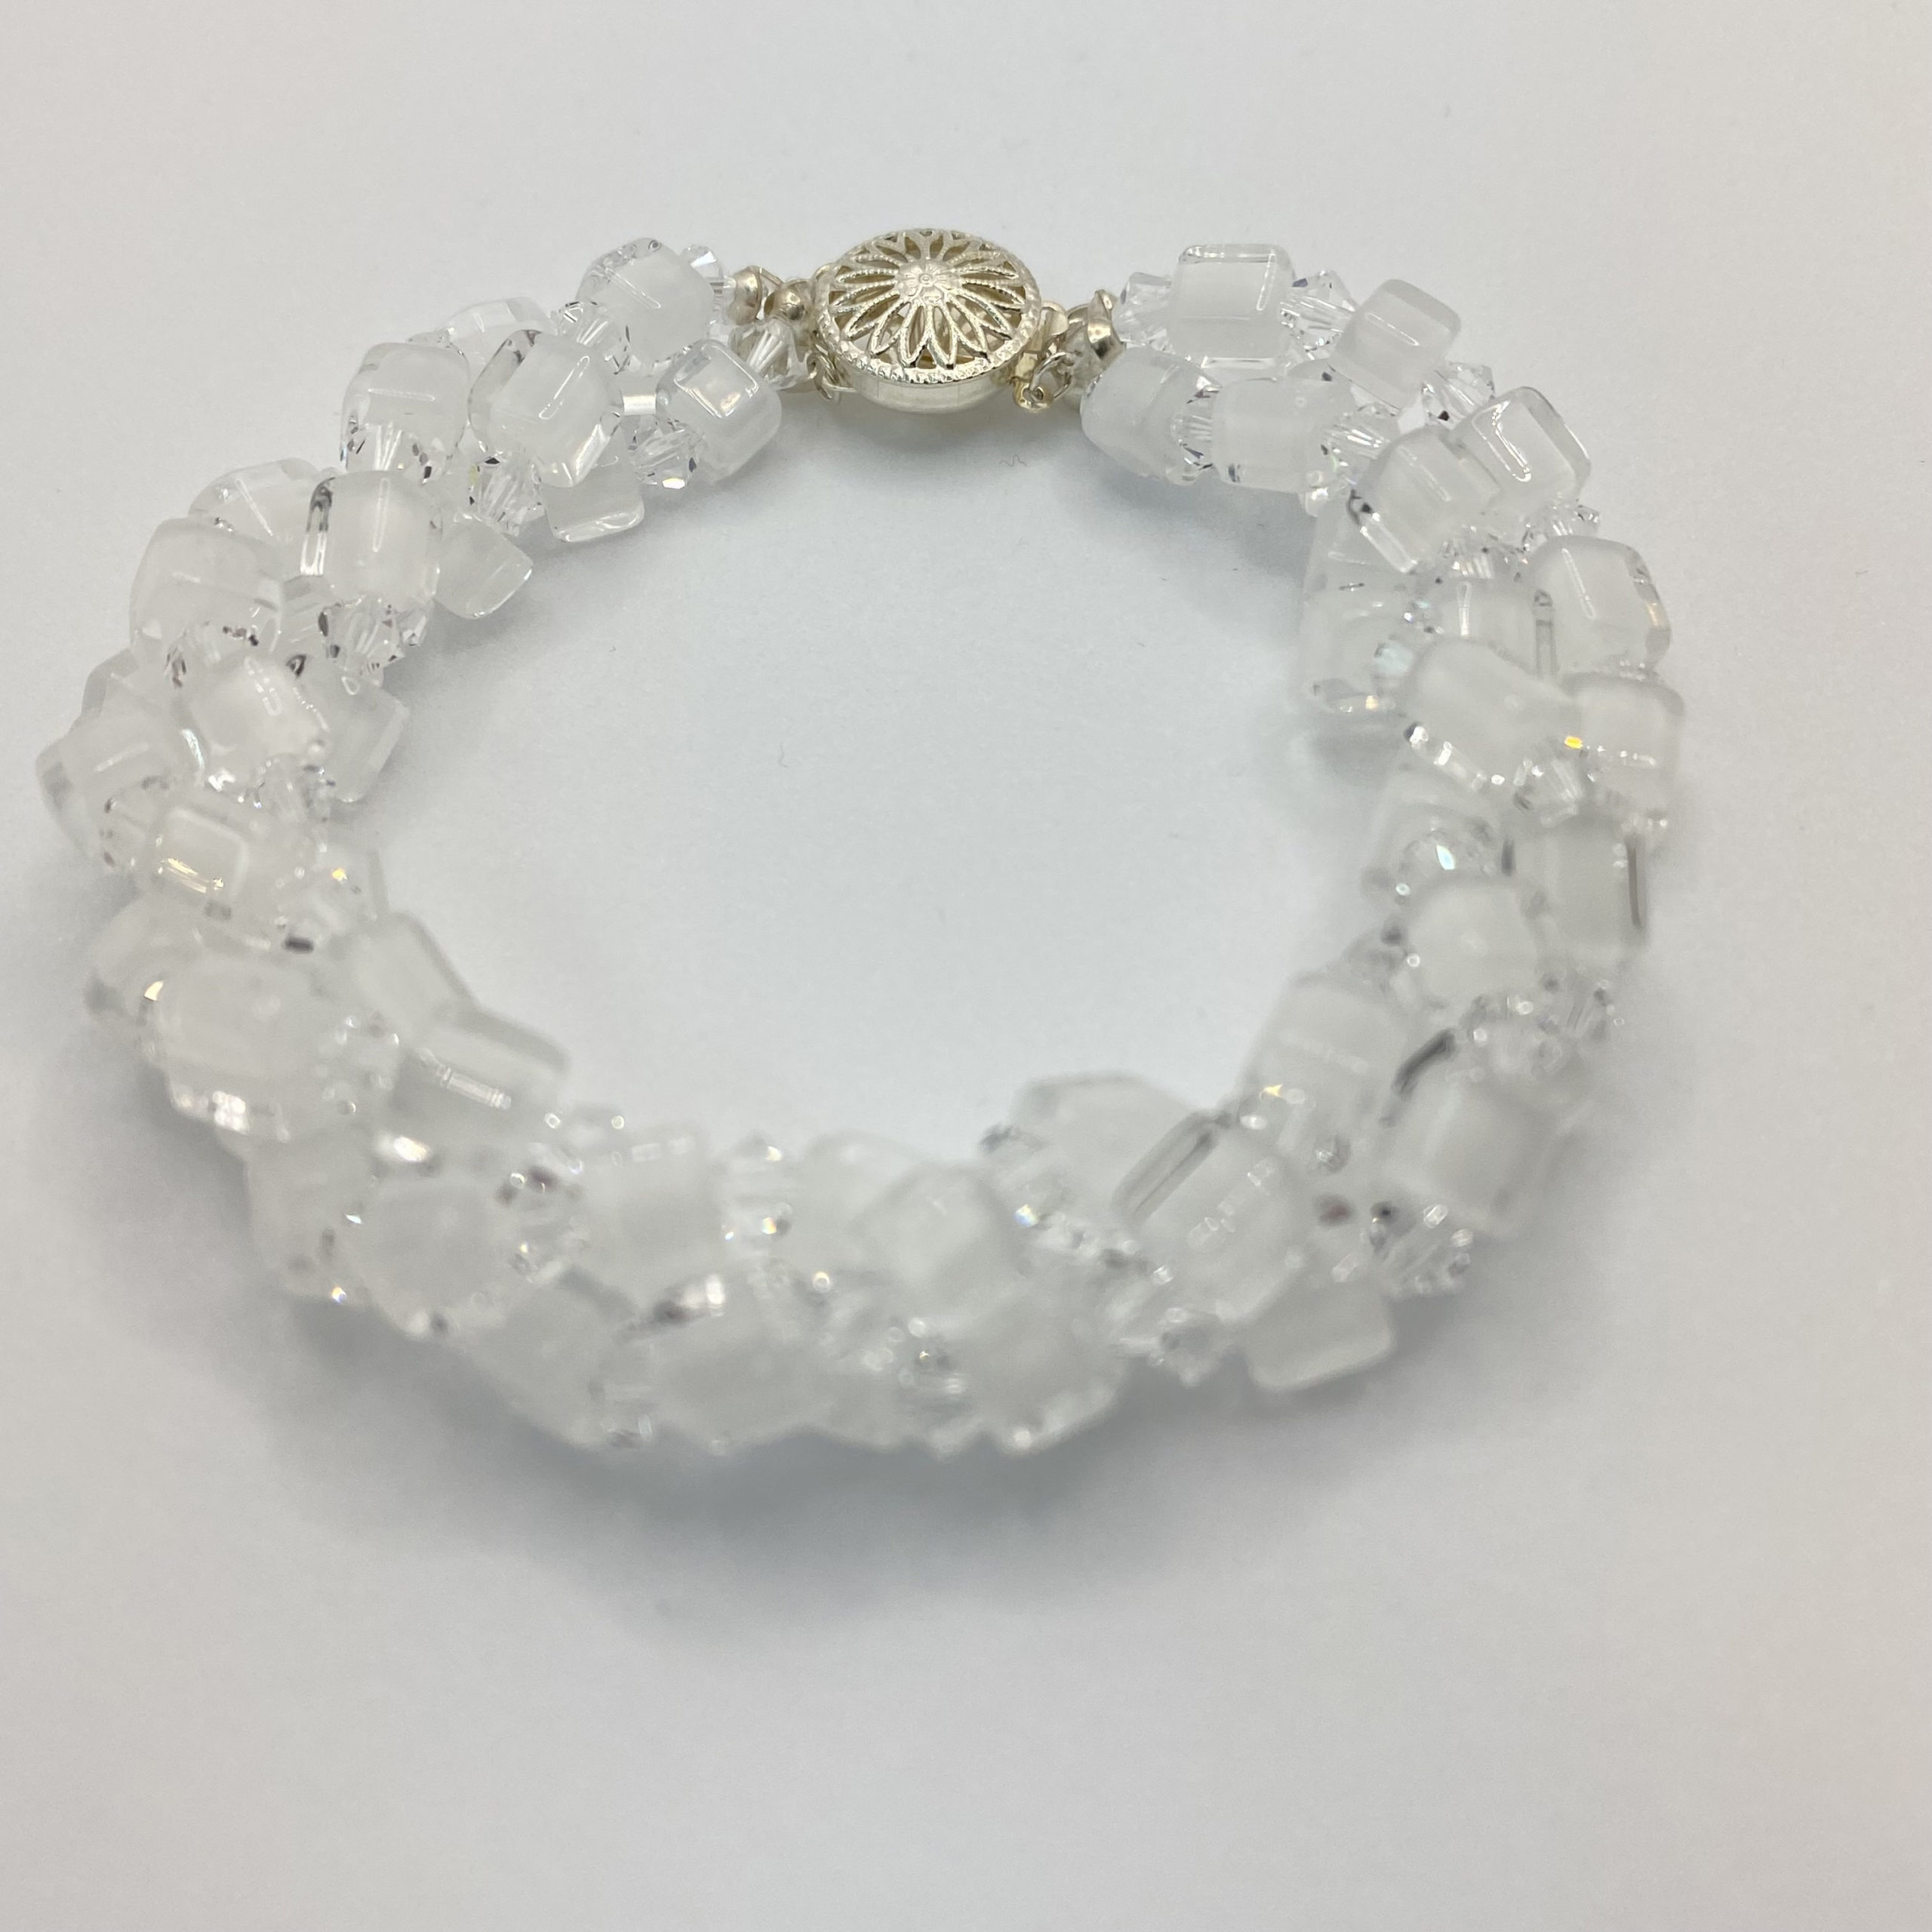 White and Crystal Triple Bracelet - Beads To You